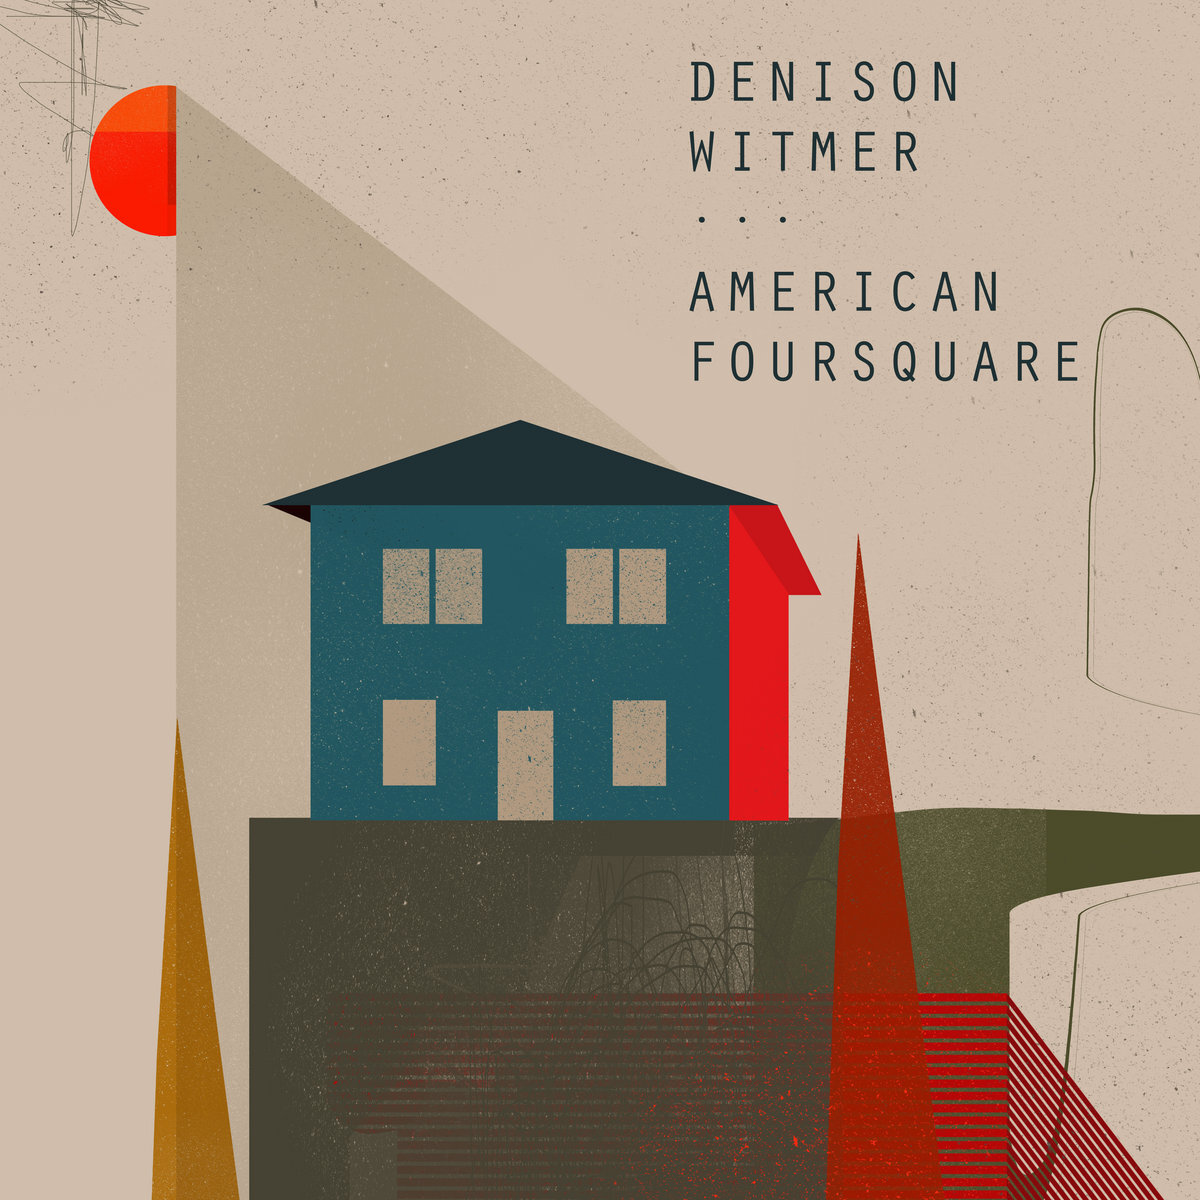 Denison Witmer - American Foursquare (Thousand Dollar Pedals)